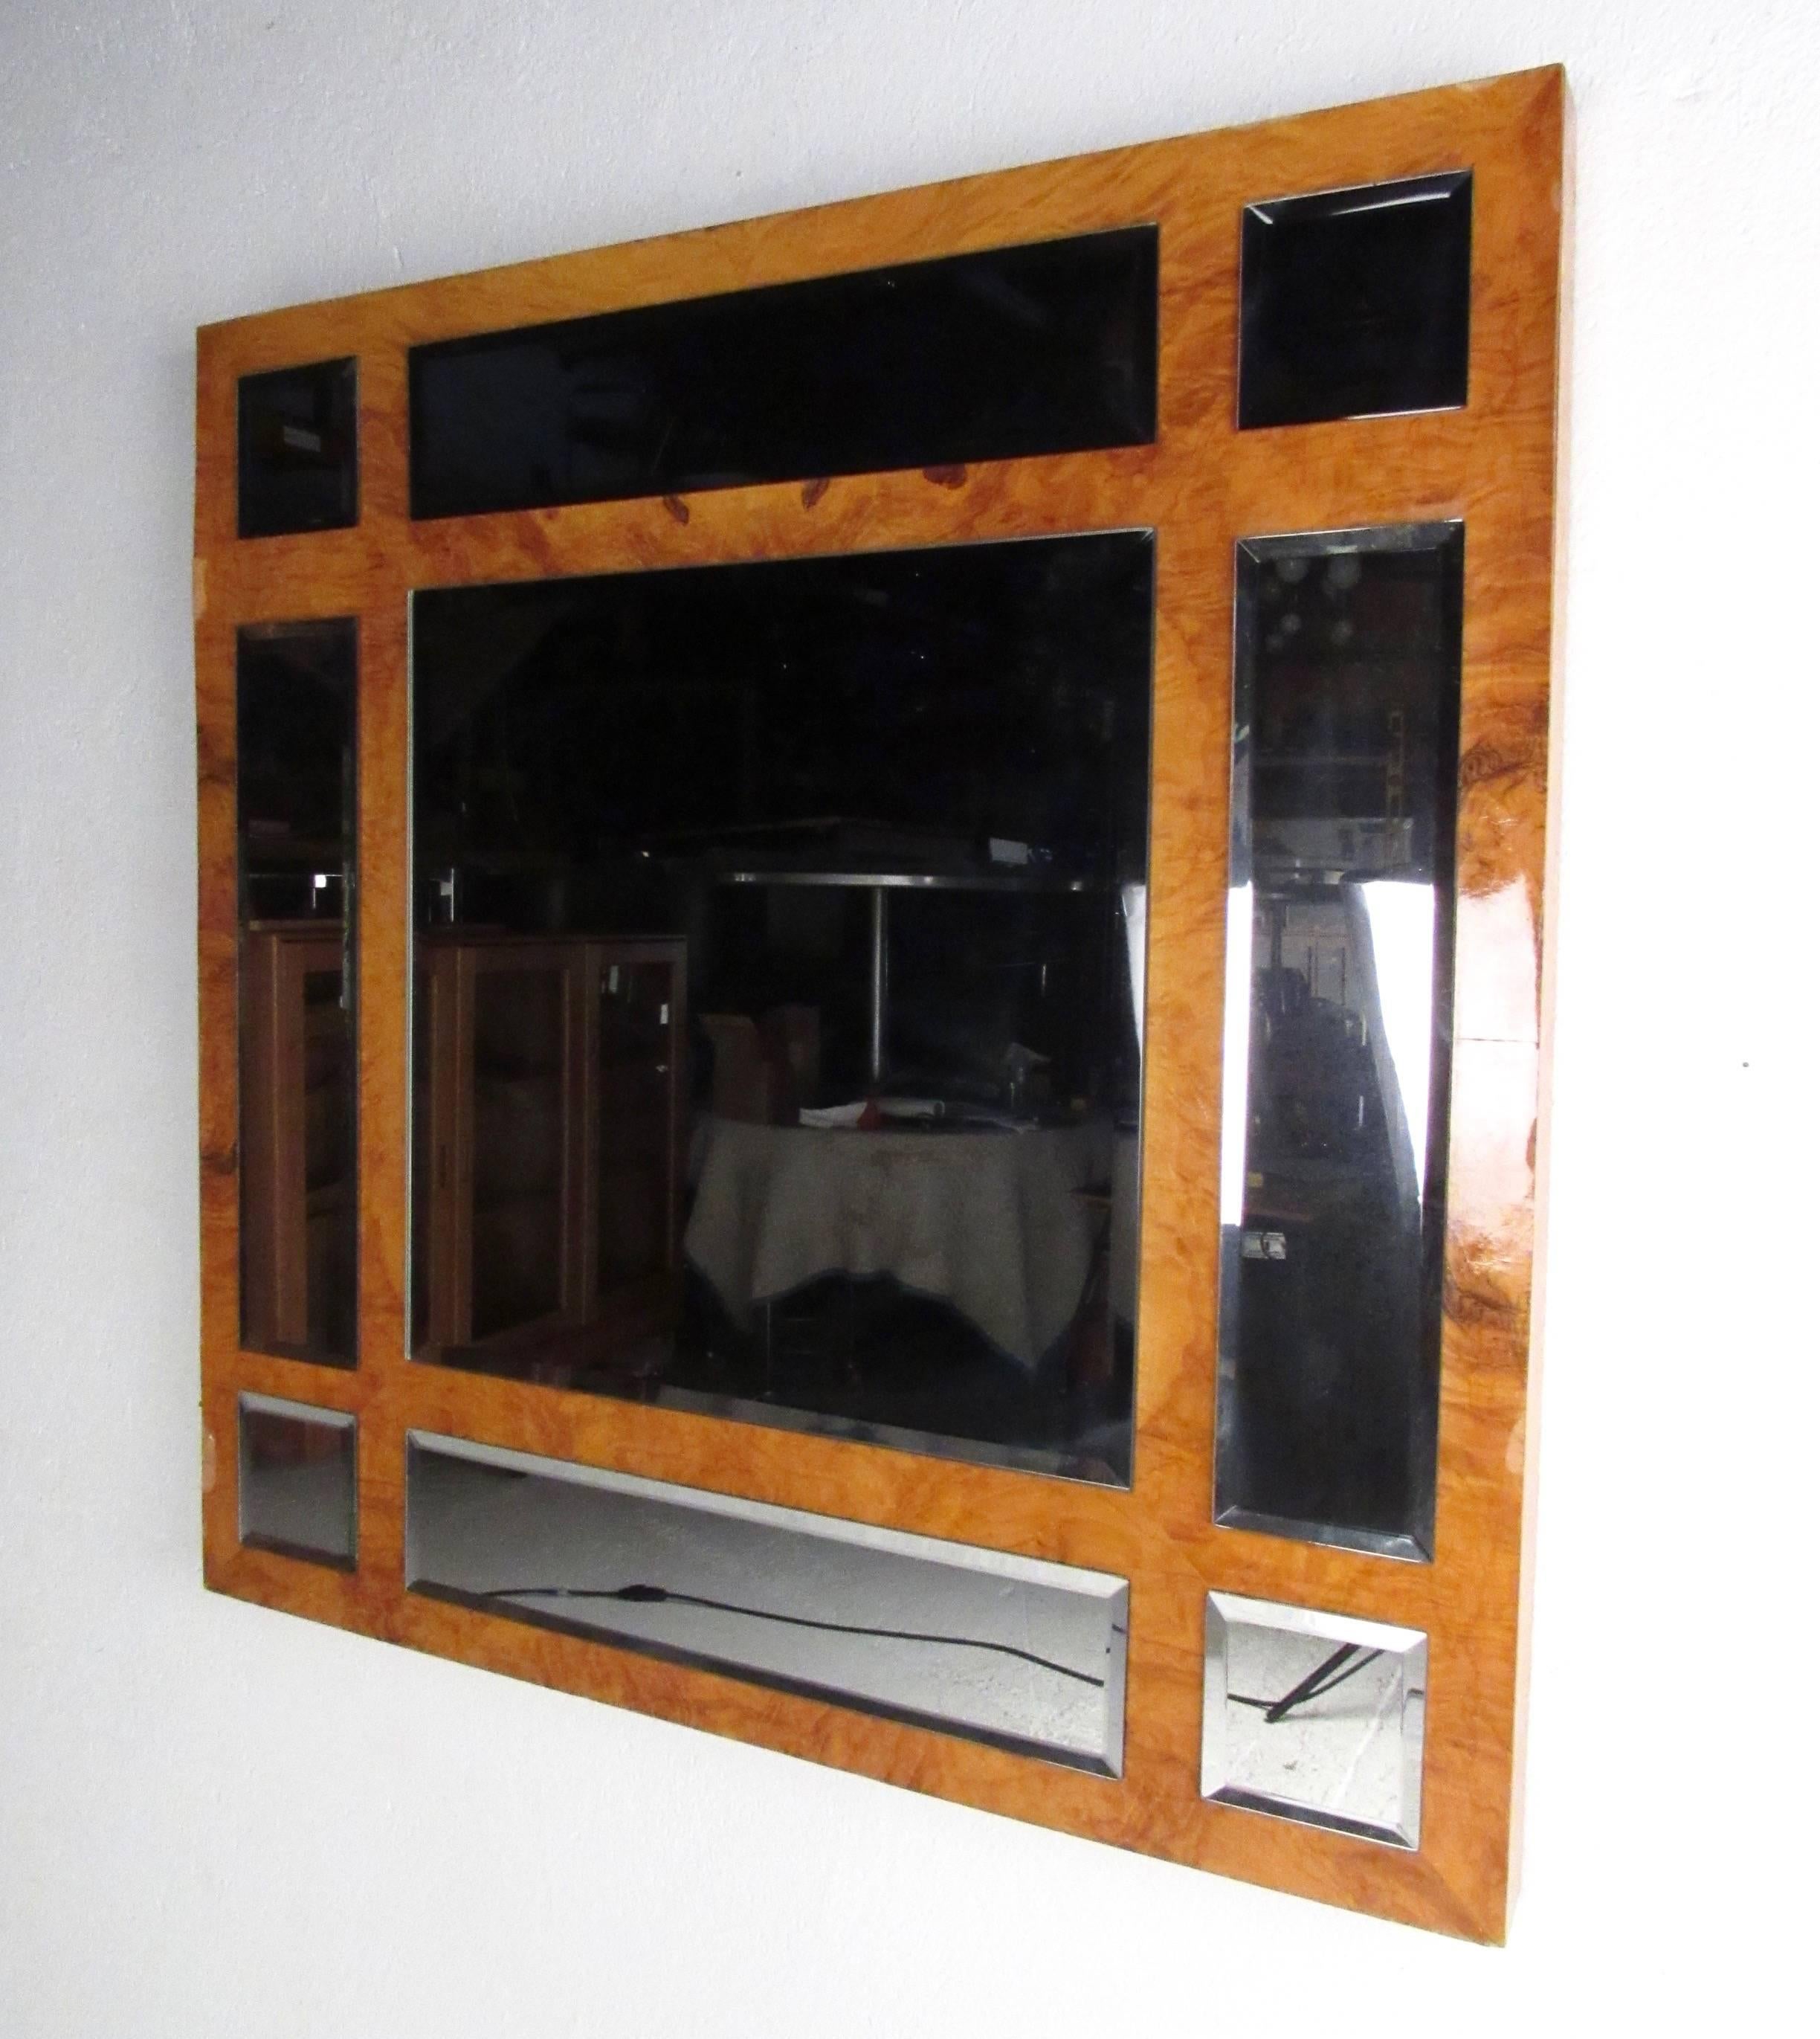 This stunning vintage mirror by Gary Copeland features burl wood finish and bevelled mirror panels. Unique artistic wall mirror adds a midcentury accent to home or business, please confirm item location (NY or NJ).